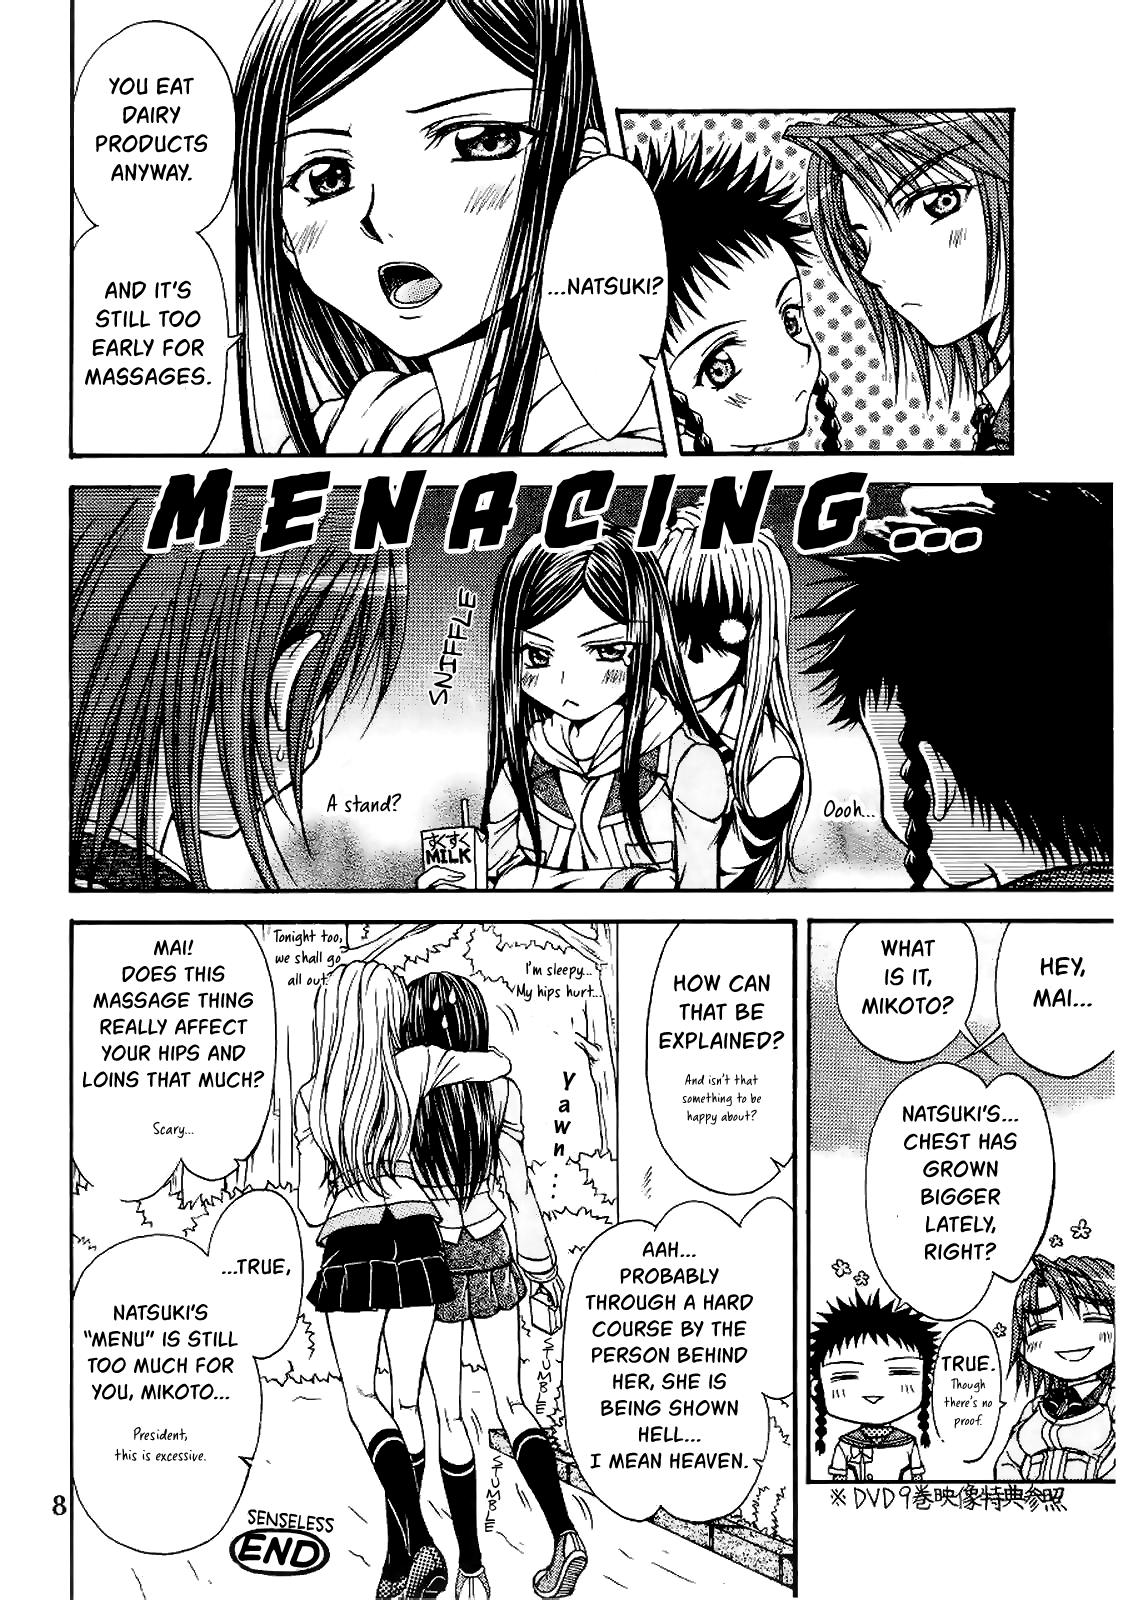 Pierced After School Dolce - Mai-hime Model - Page 8